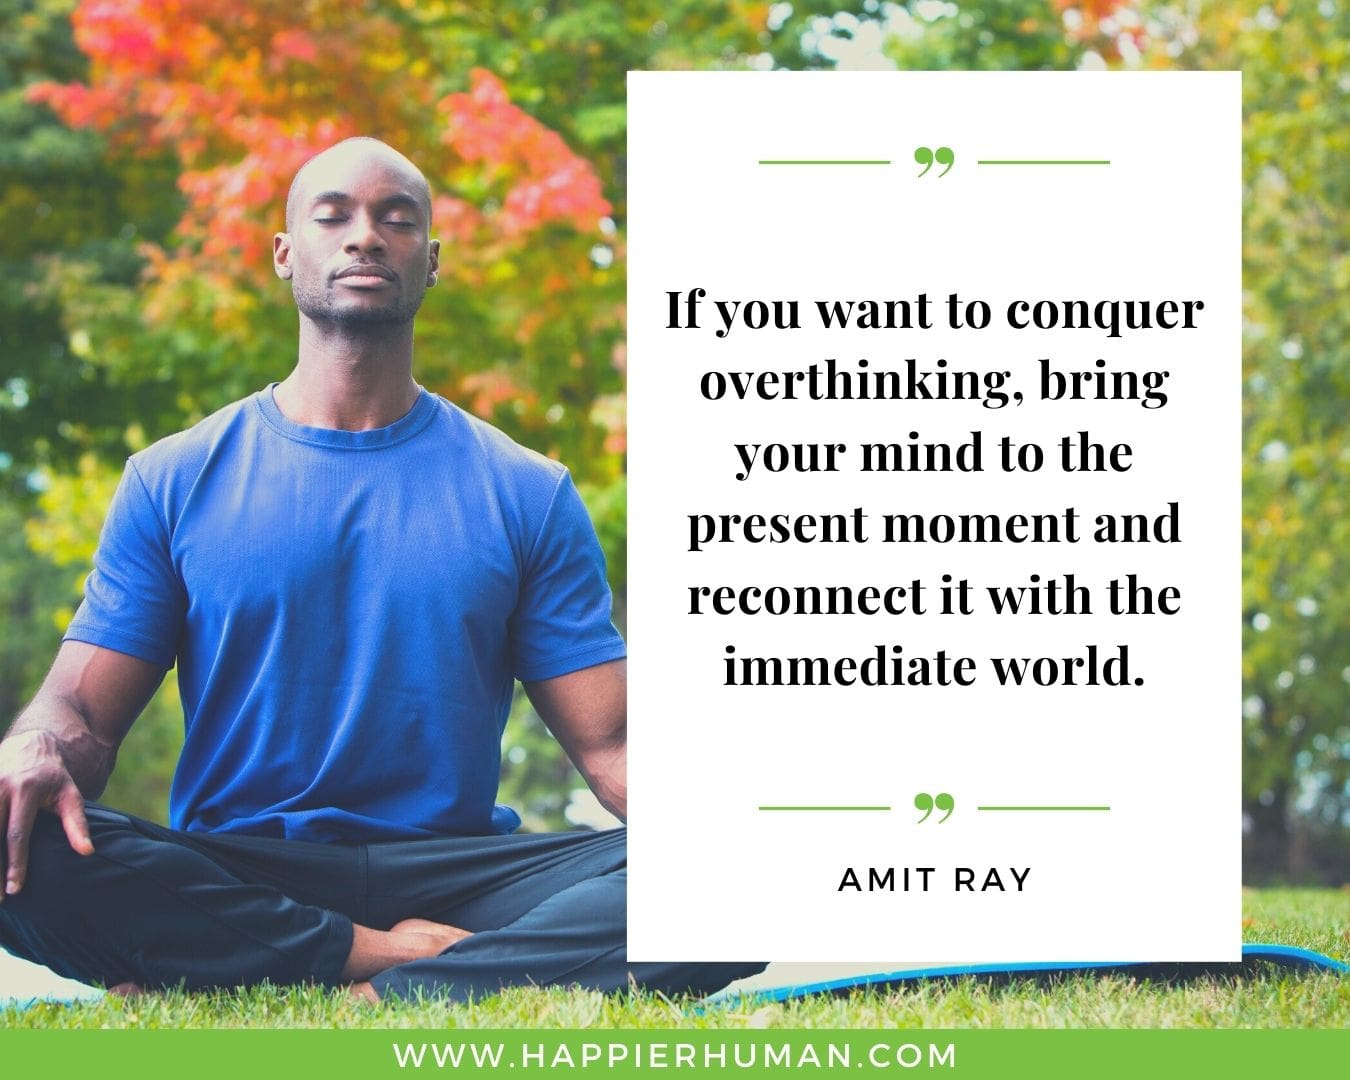 Overthinking Quotes - “If you want to conquer overthinking, bring your mind to the present moment and reconnect it with the immediate world.” - Amit Ray